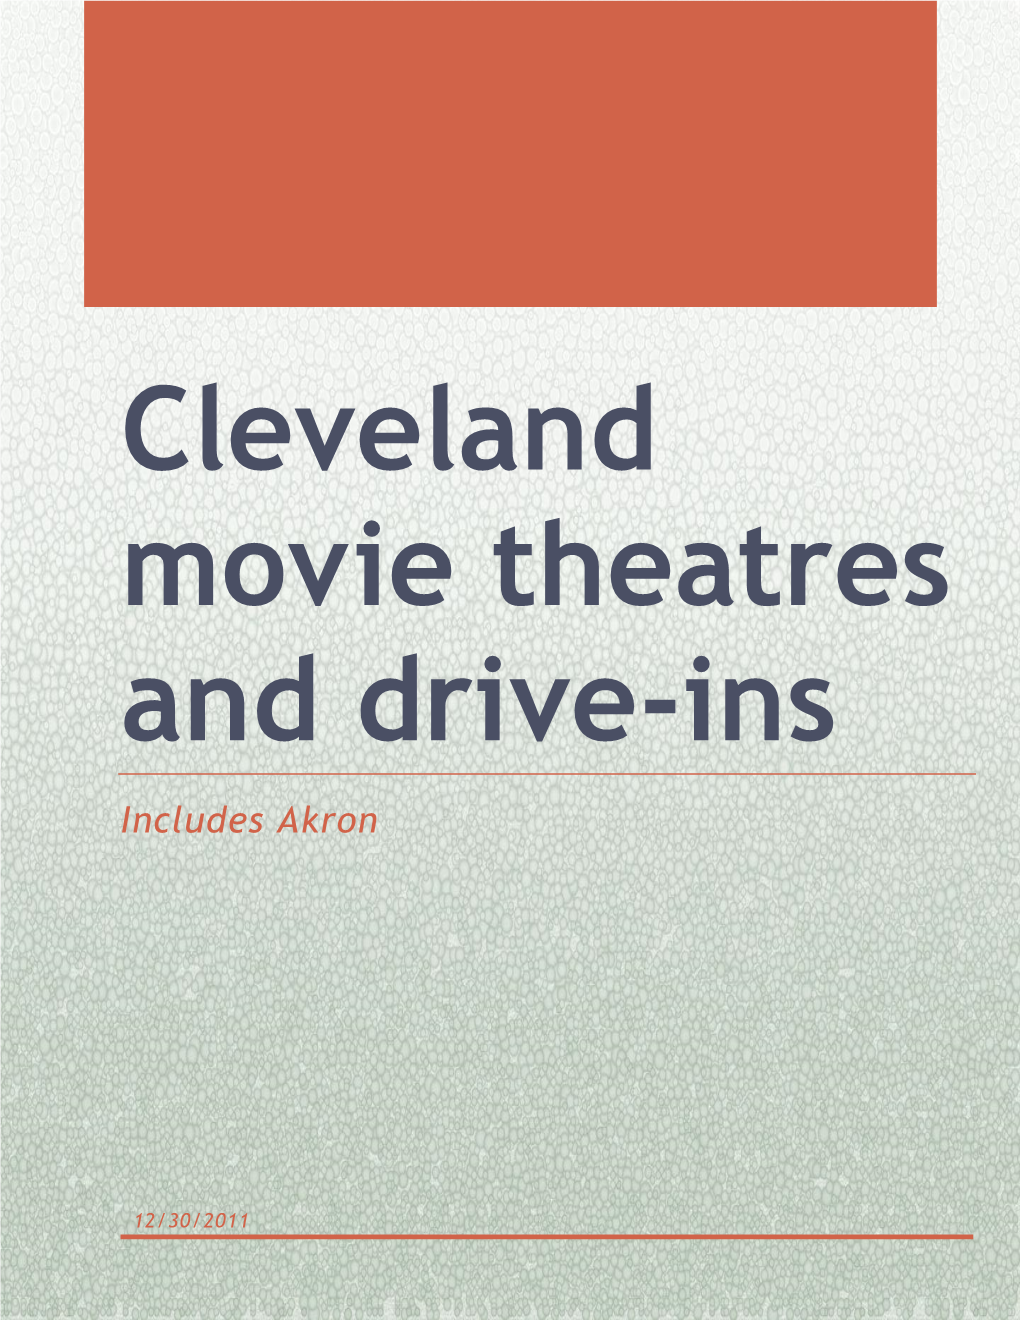 Cleveland Movie Theatres and Drive-Ins